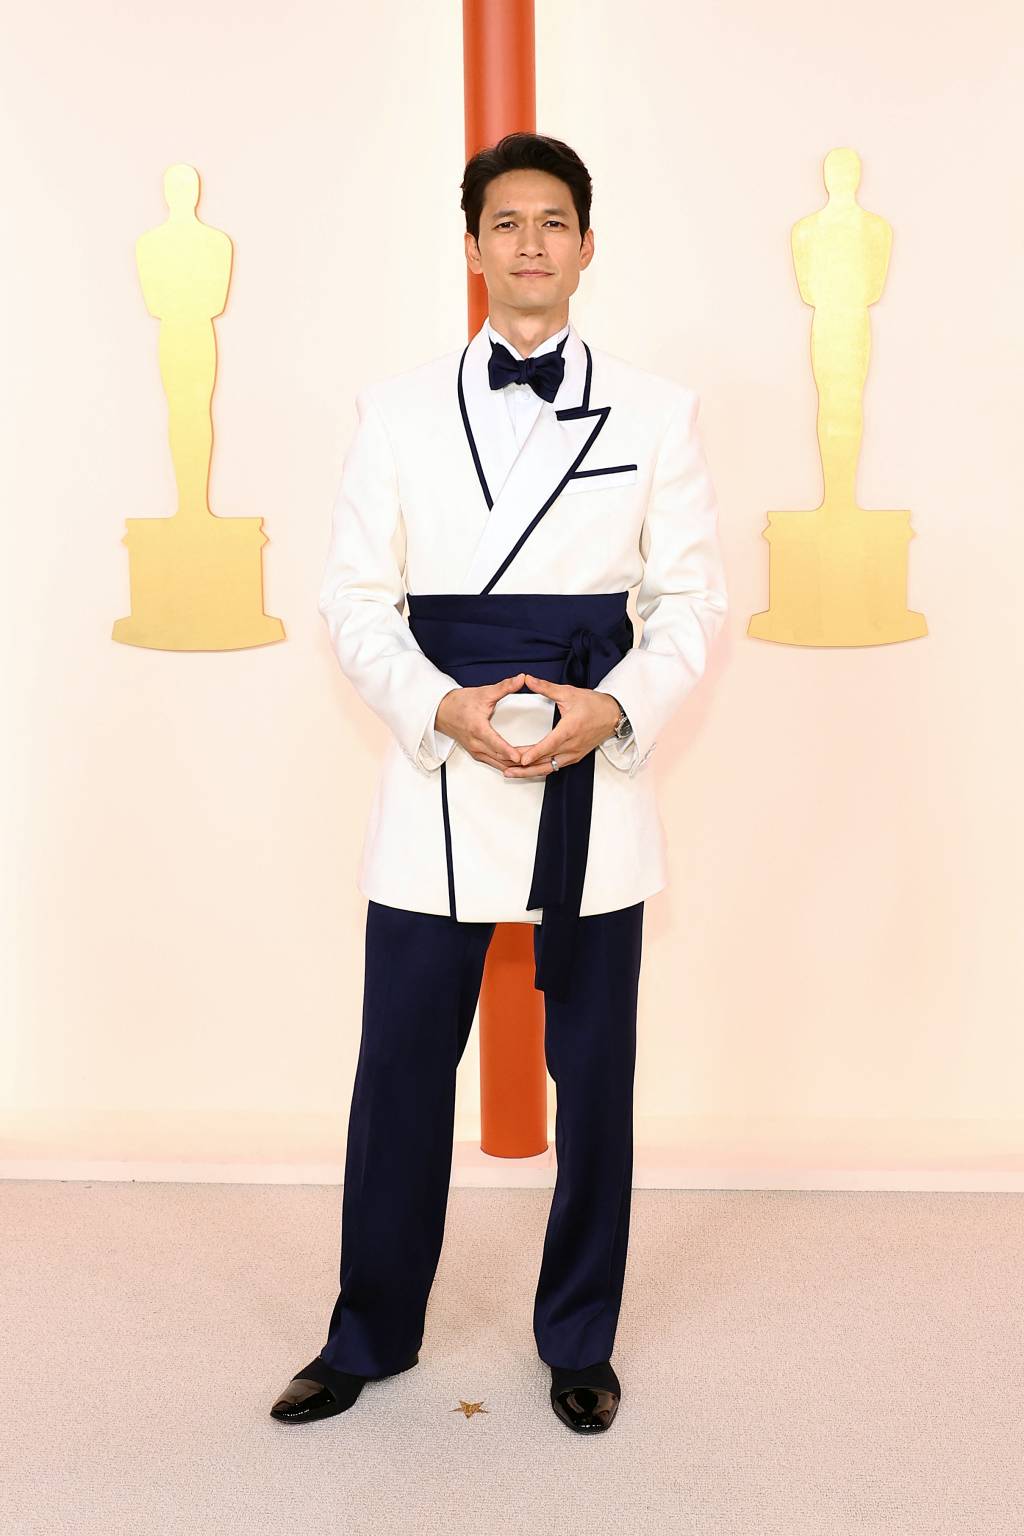 HOLLYWOOD, CALIFORNIA - MARCH 12: Harry Shum Jr. attends the 95th Annual Academy Awards on March 12, 2023 in Hollywood, California. Arturo Holmes/Getty Images /AFP (Photo by Arturo Holmes / GETTY IMAGES NORTH AMERICA / Getty Images via AFP)